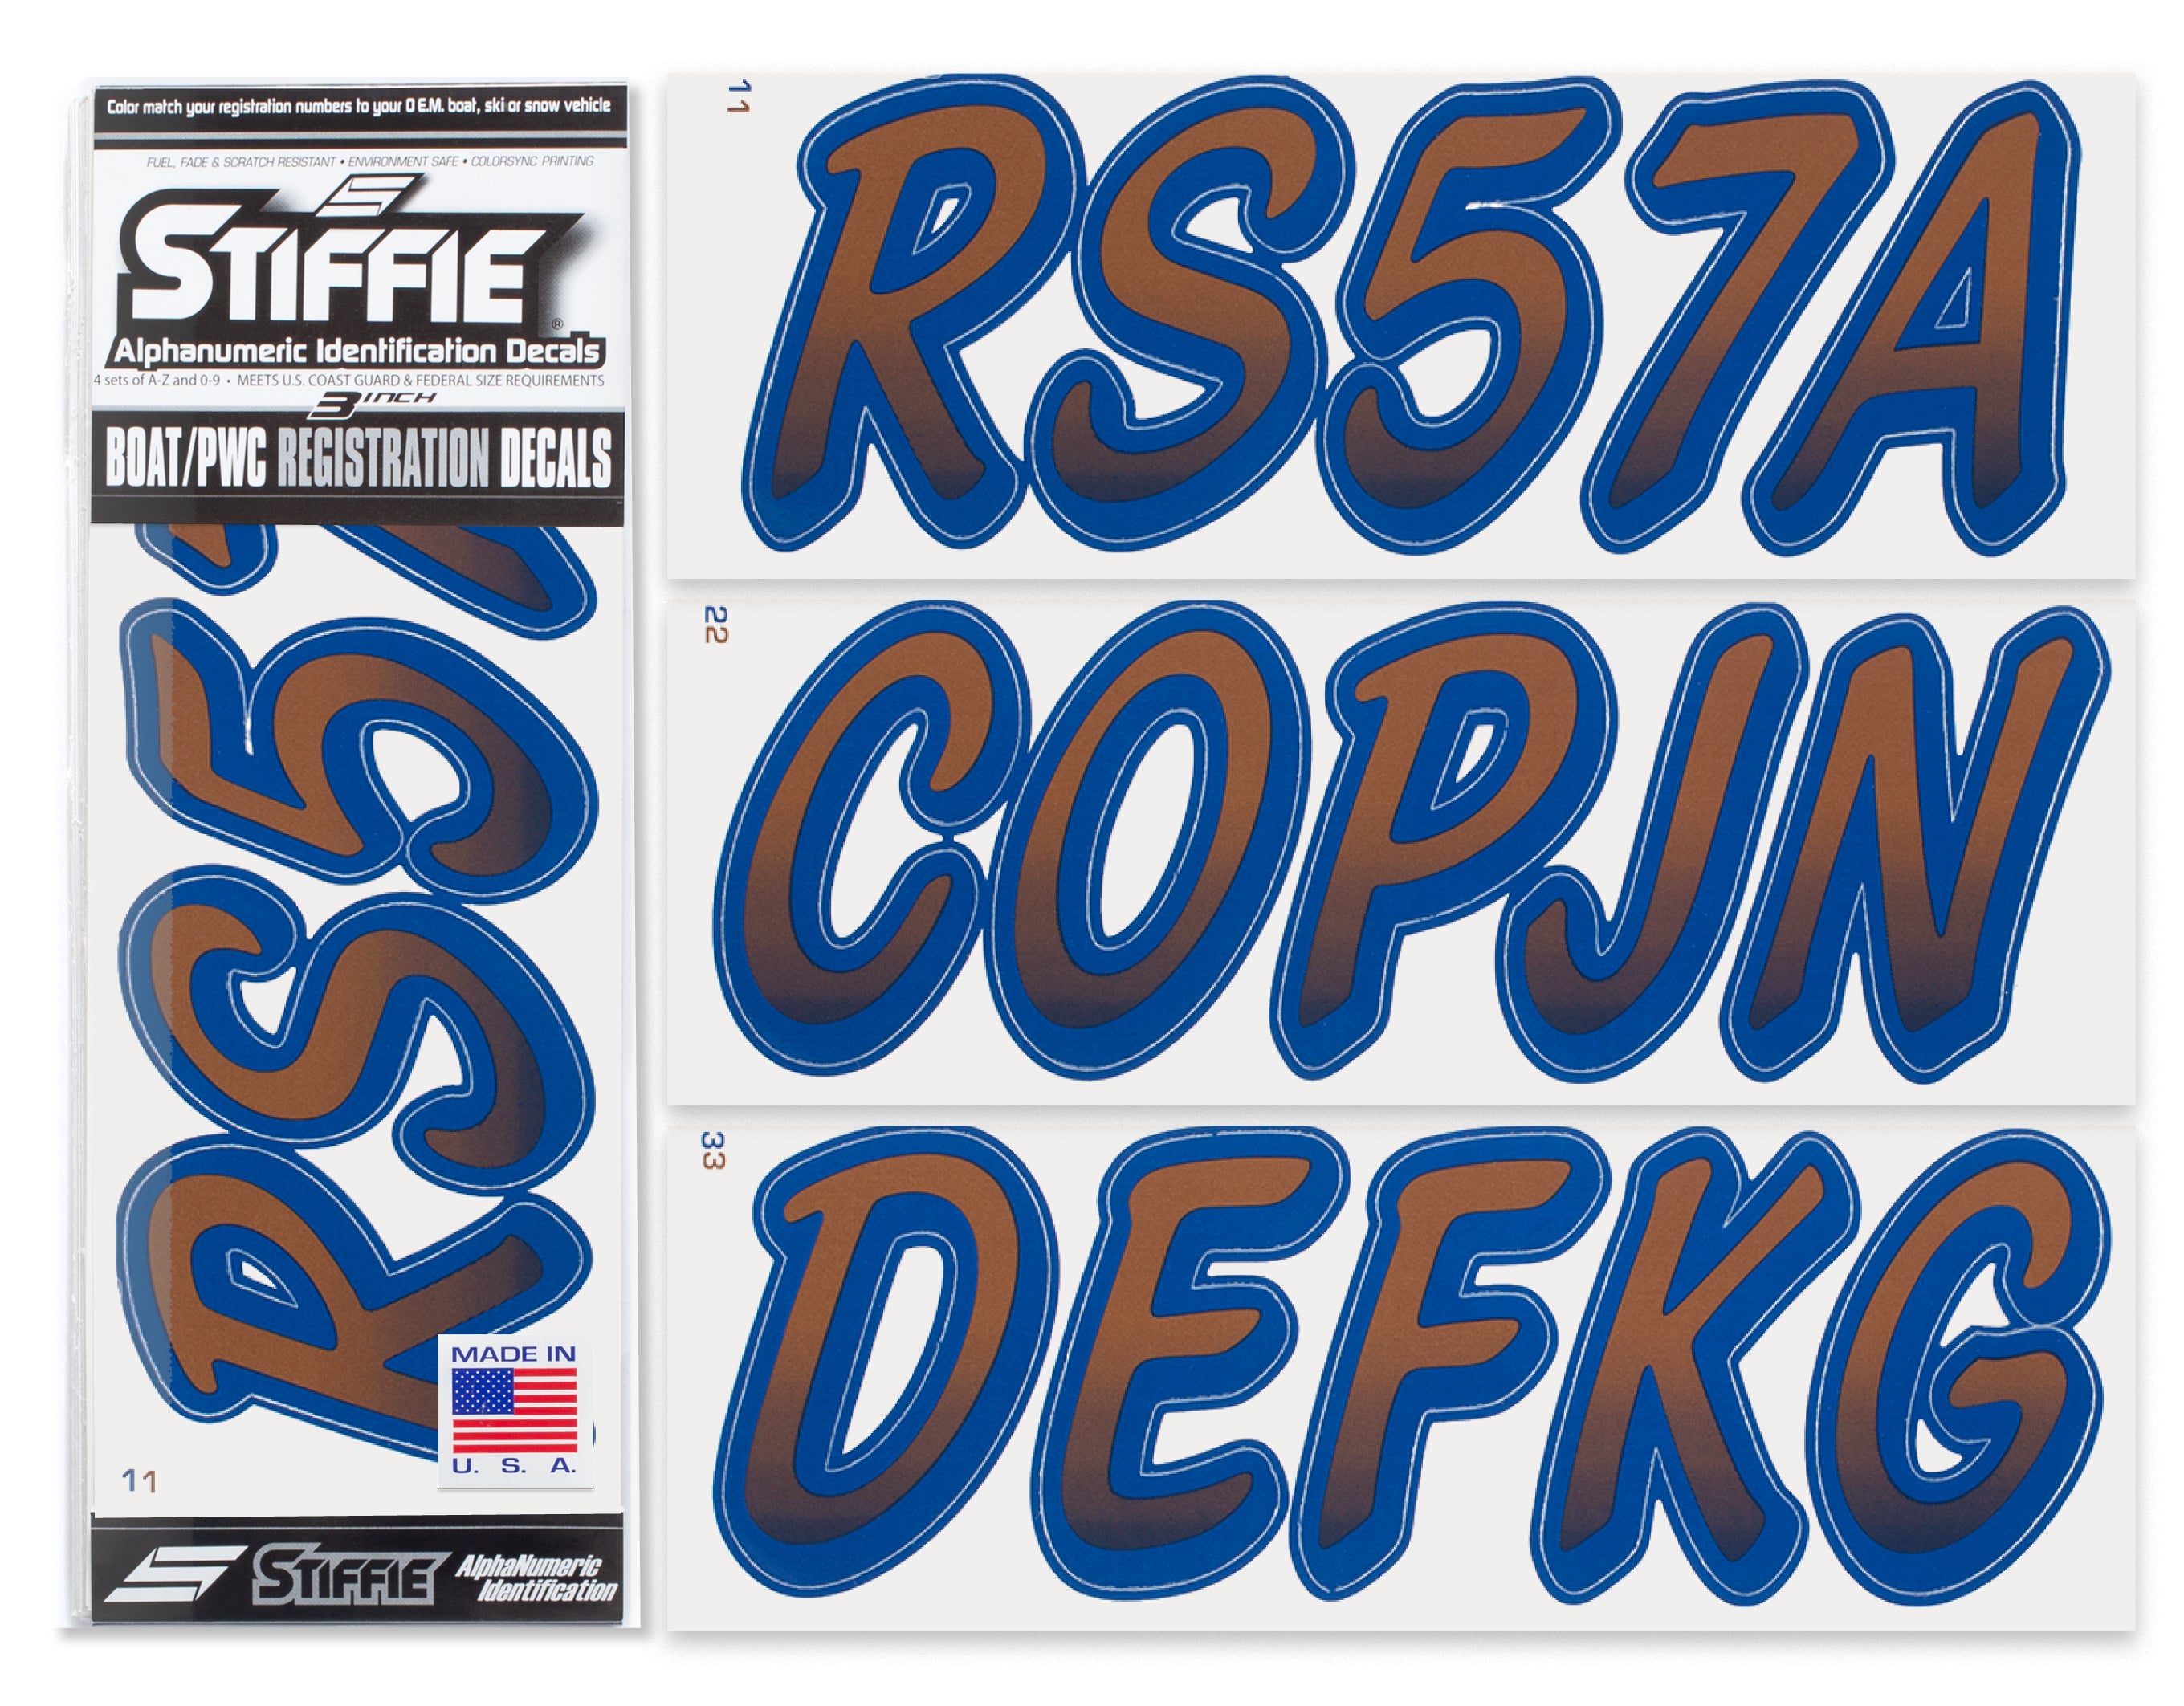 Stiffie Whipline Metallic Copper/Navy 3" Alpha-Numeric Registration Identification Numbers Stickers Decals for Boats & Personal Watercraft